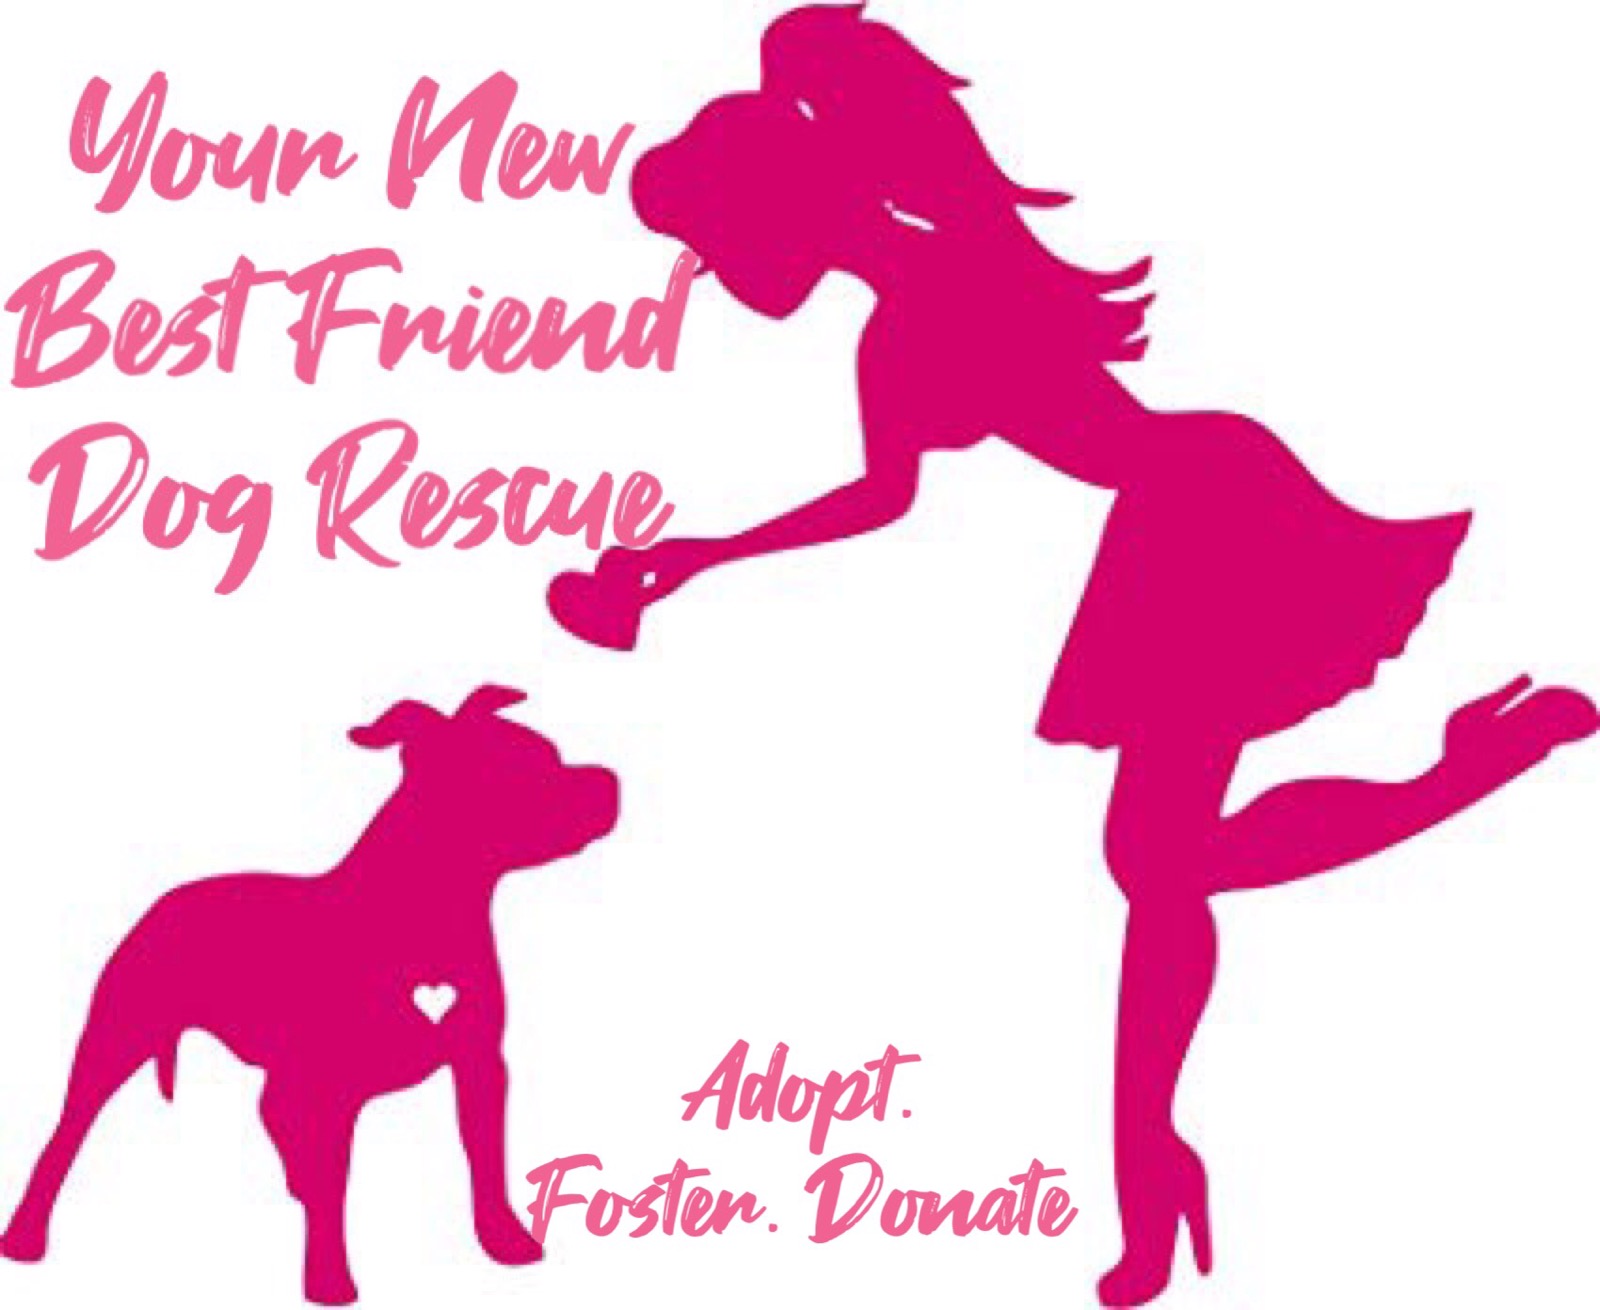 Your New Best Friend Dog Rescue